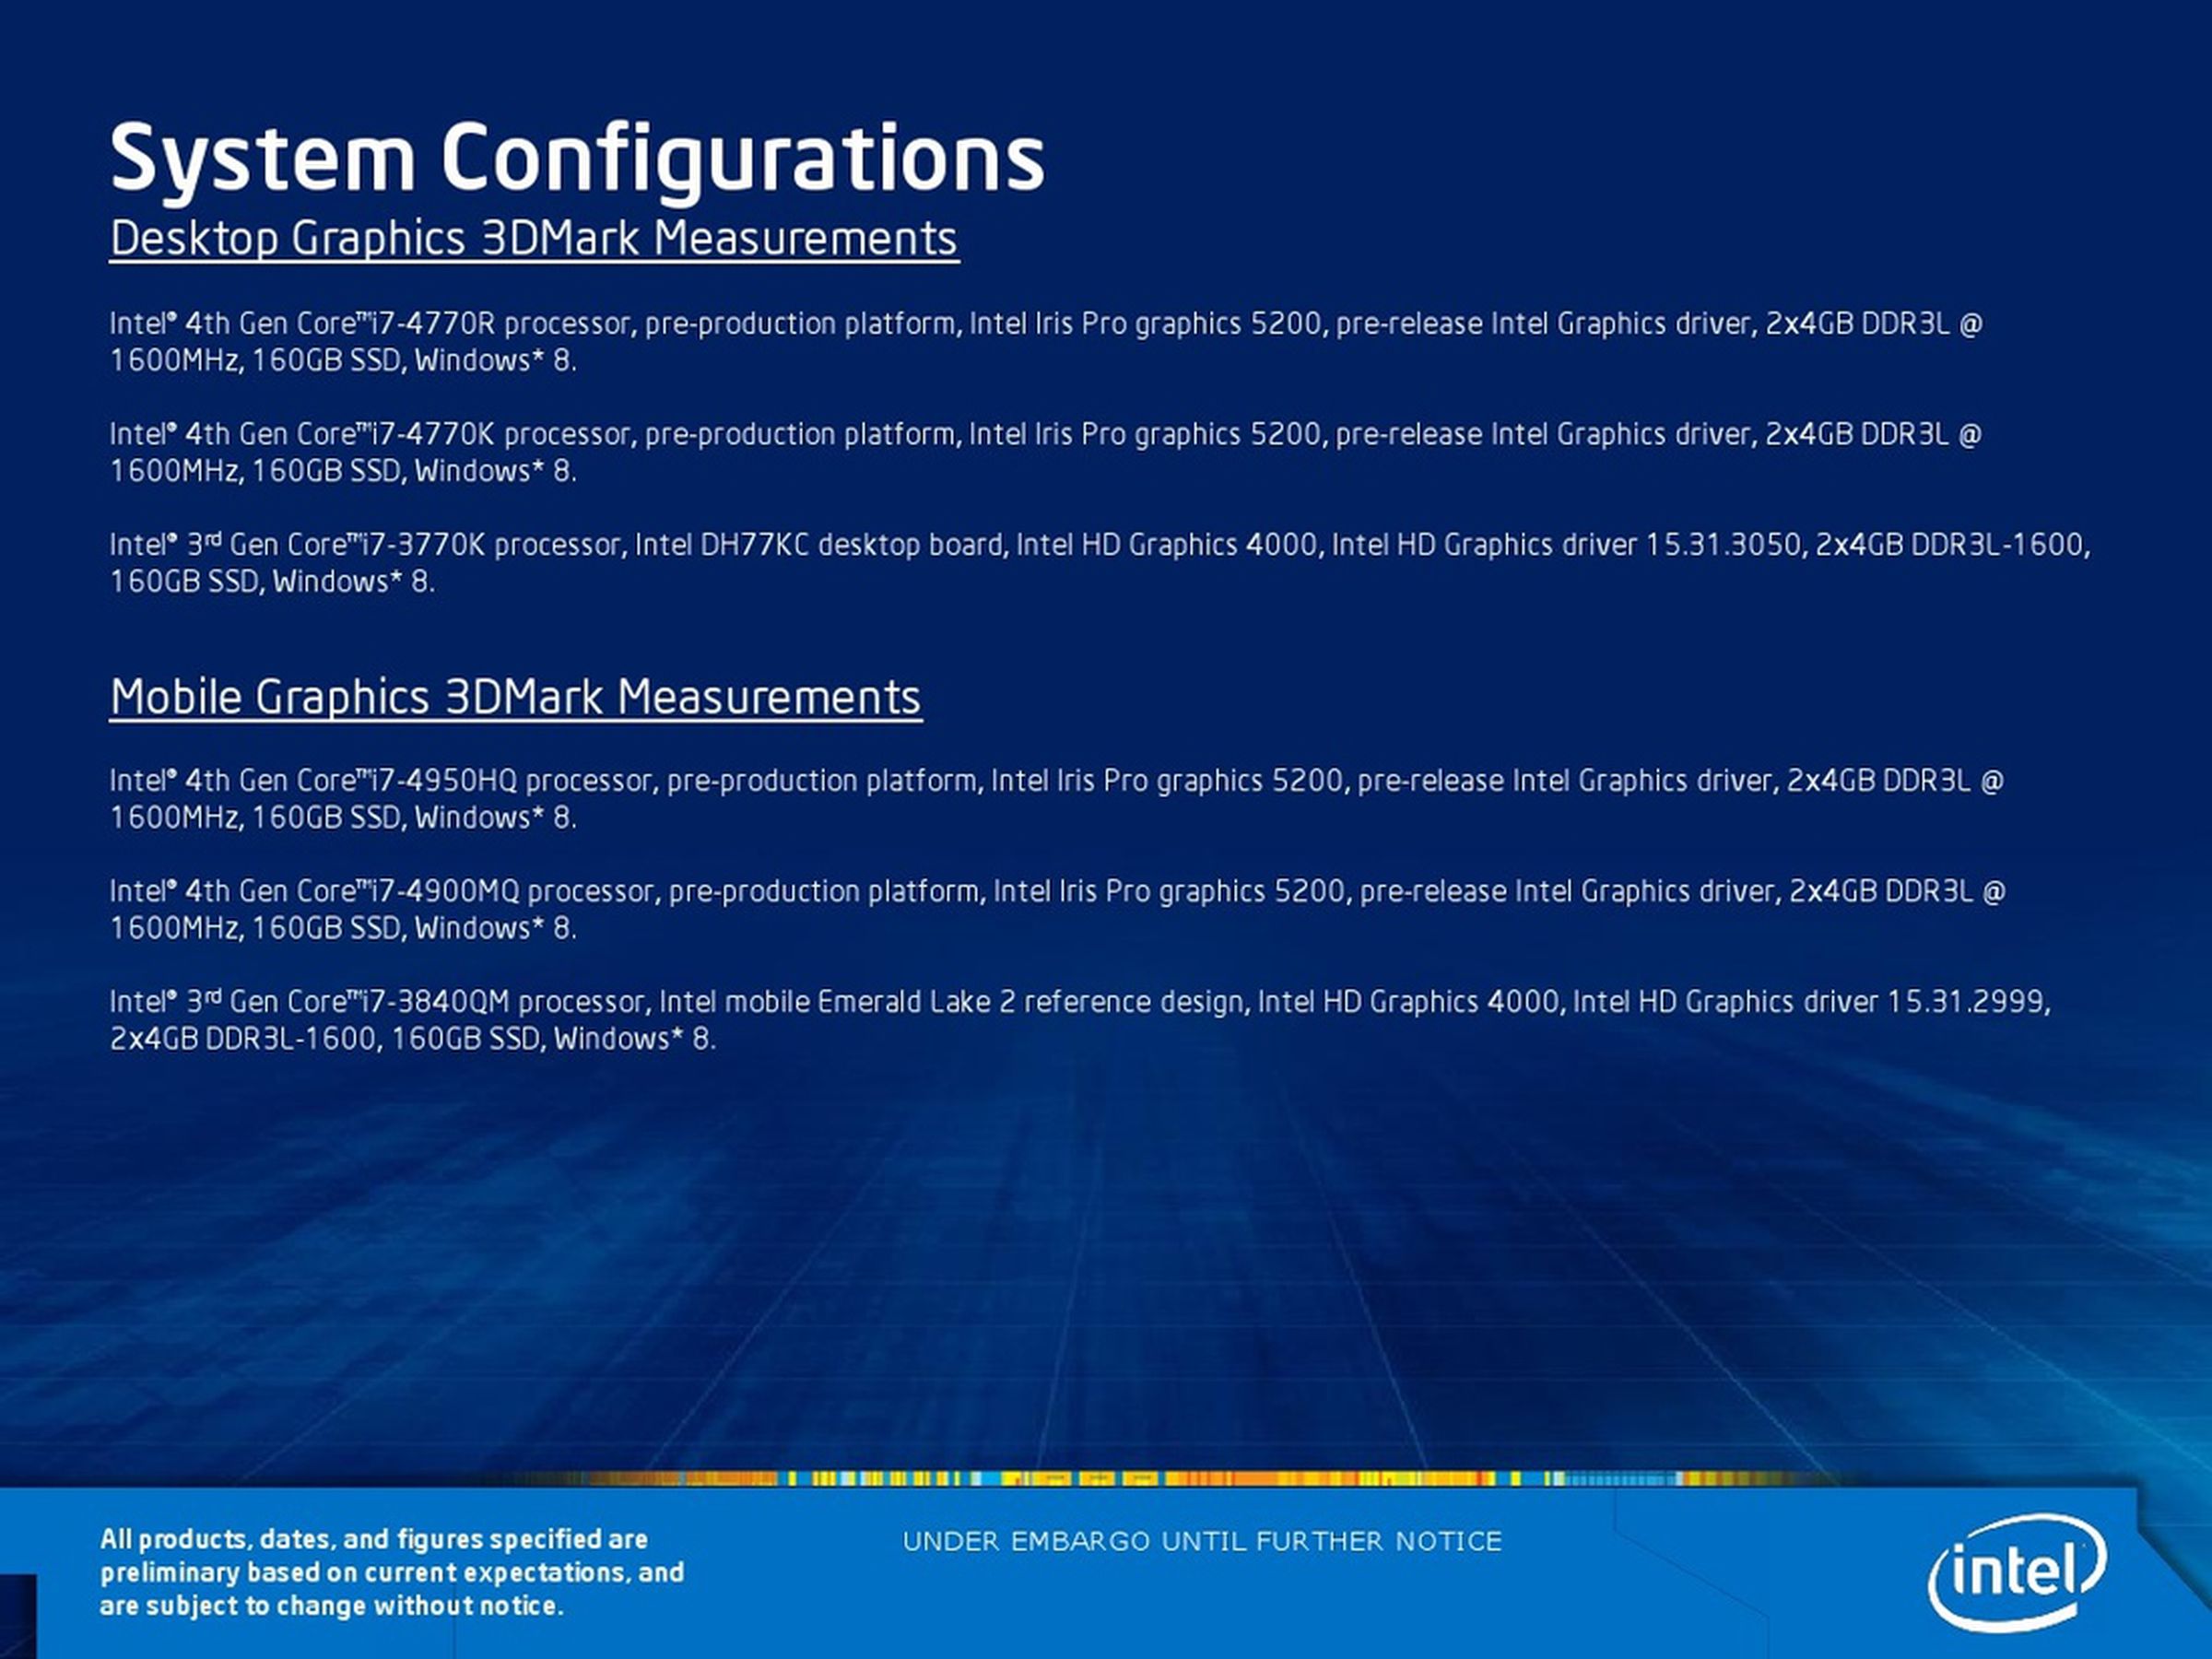 Intel Iris Graphics for Haswell processors